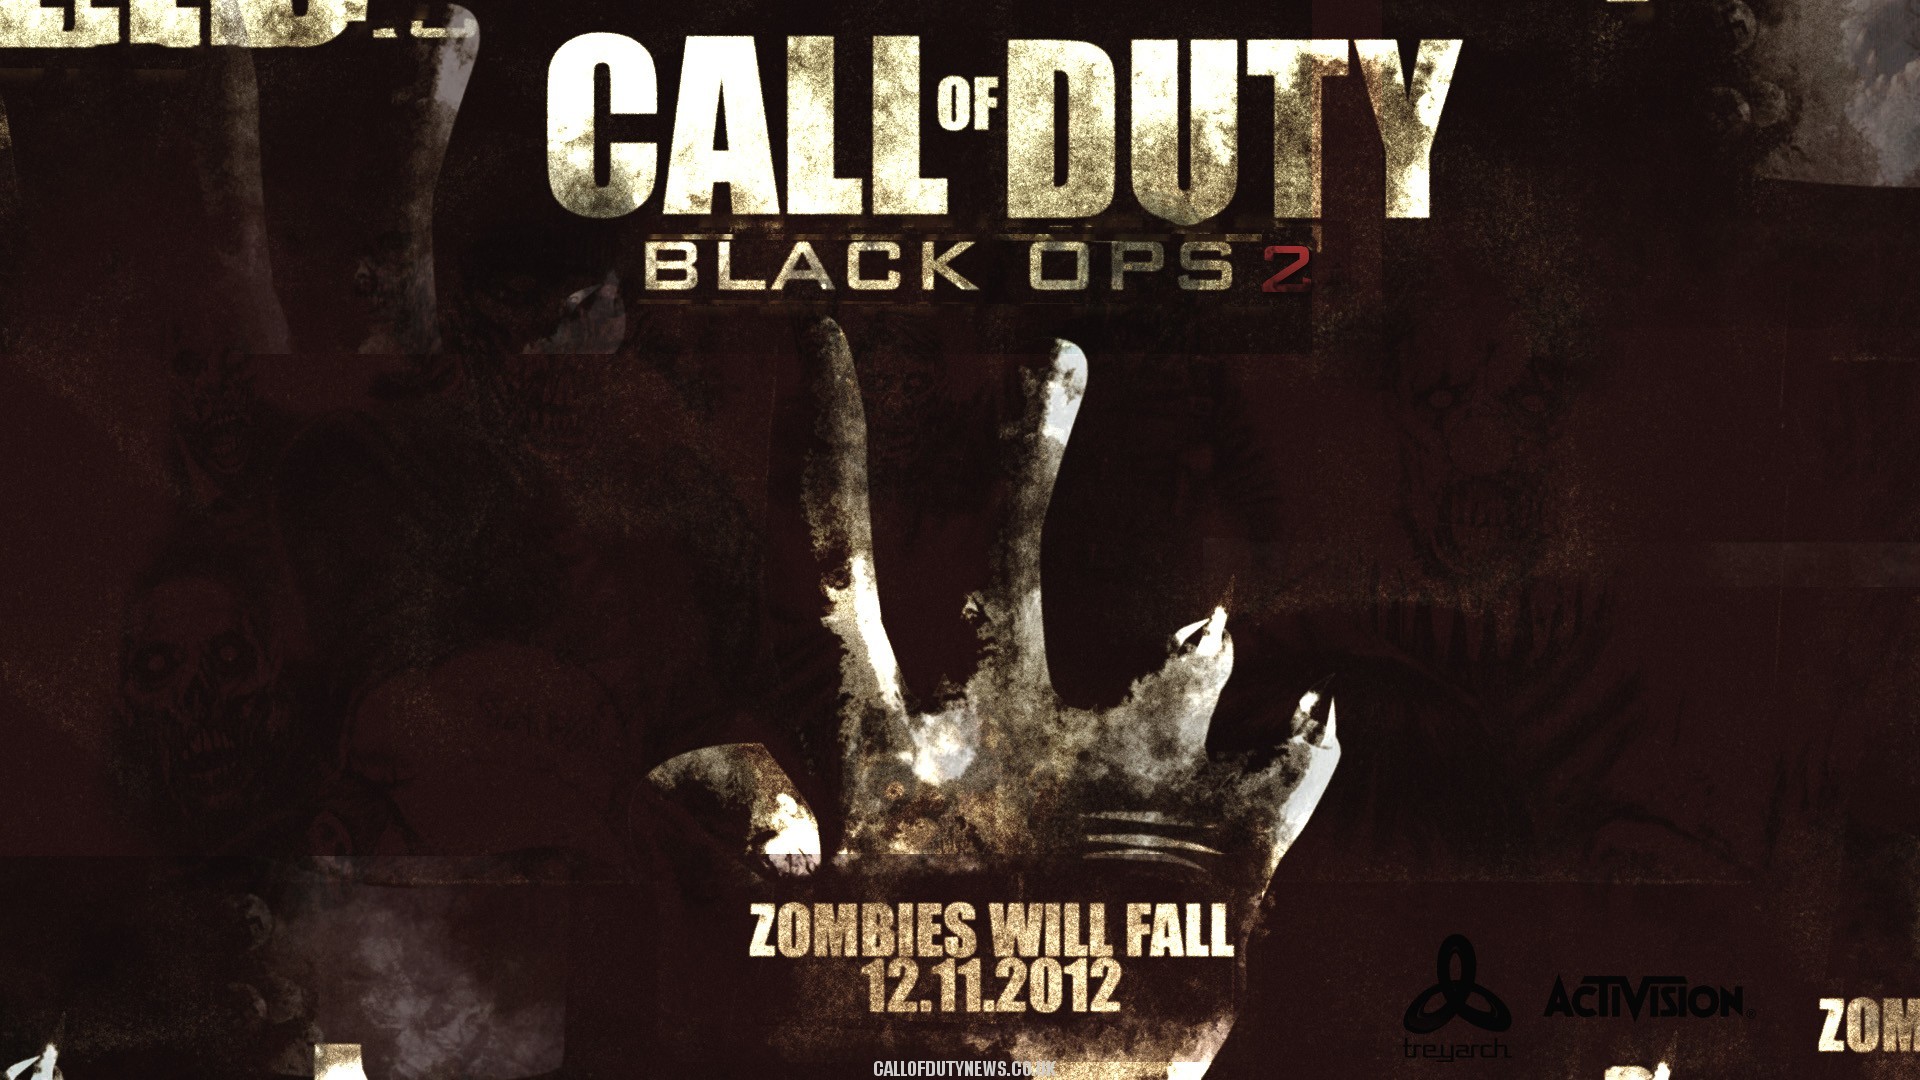 cod zombies iphone wallpaper,action adventure game,movie,album cover,pc game,poster